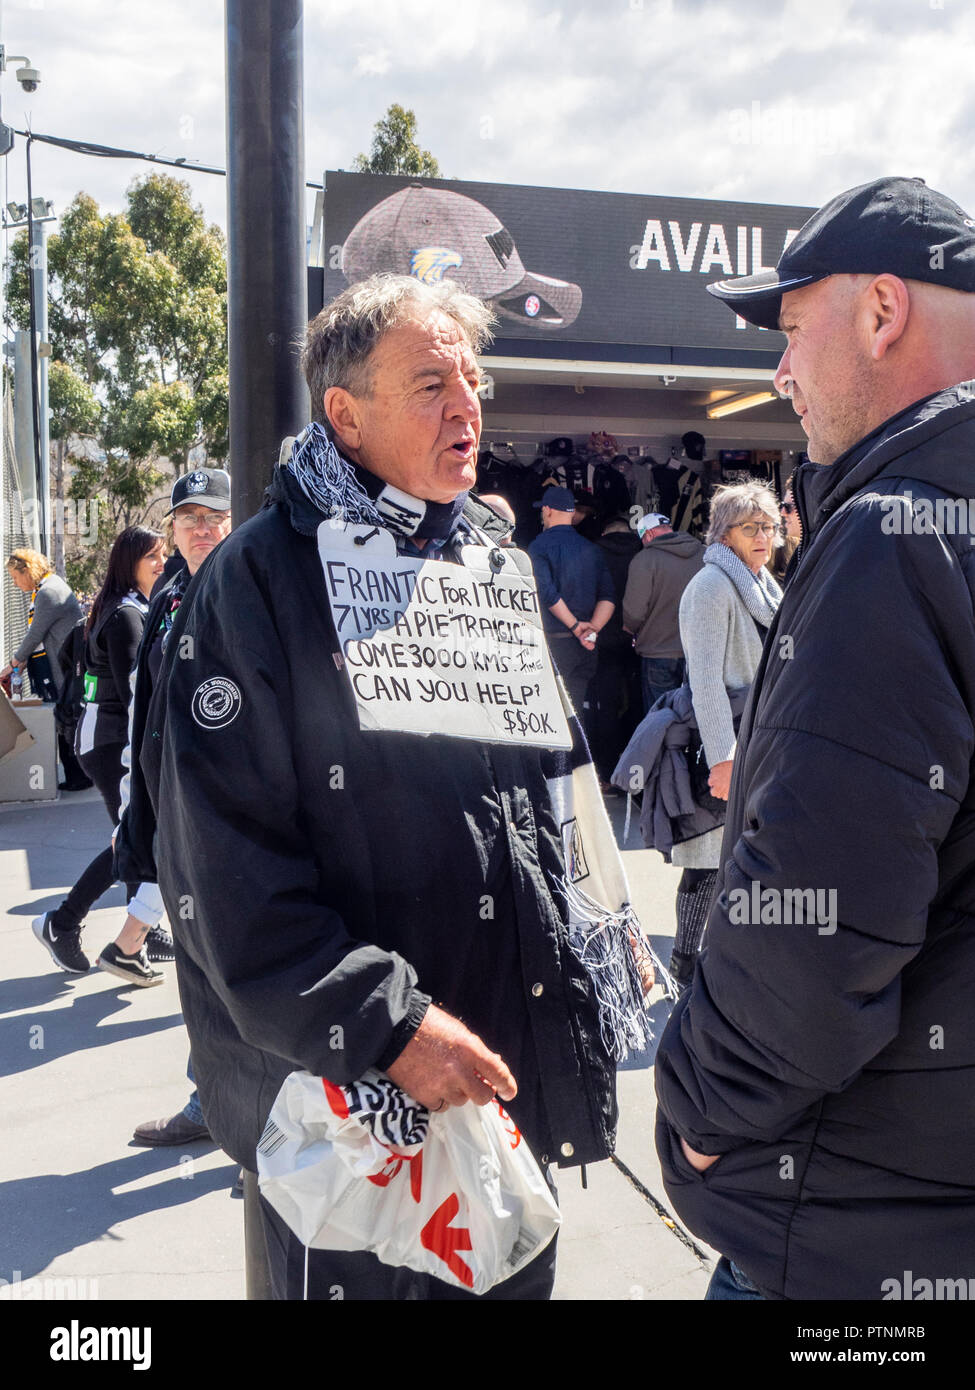 Collingwood Football Club fan and supporter with a sign wanting to buy a ticket to the 2018 AFL Grand Final at MCG, Melbourne Victoria Australia. Stock Photo